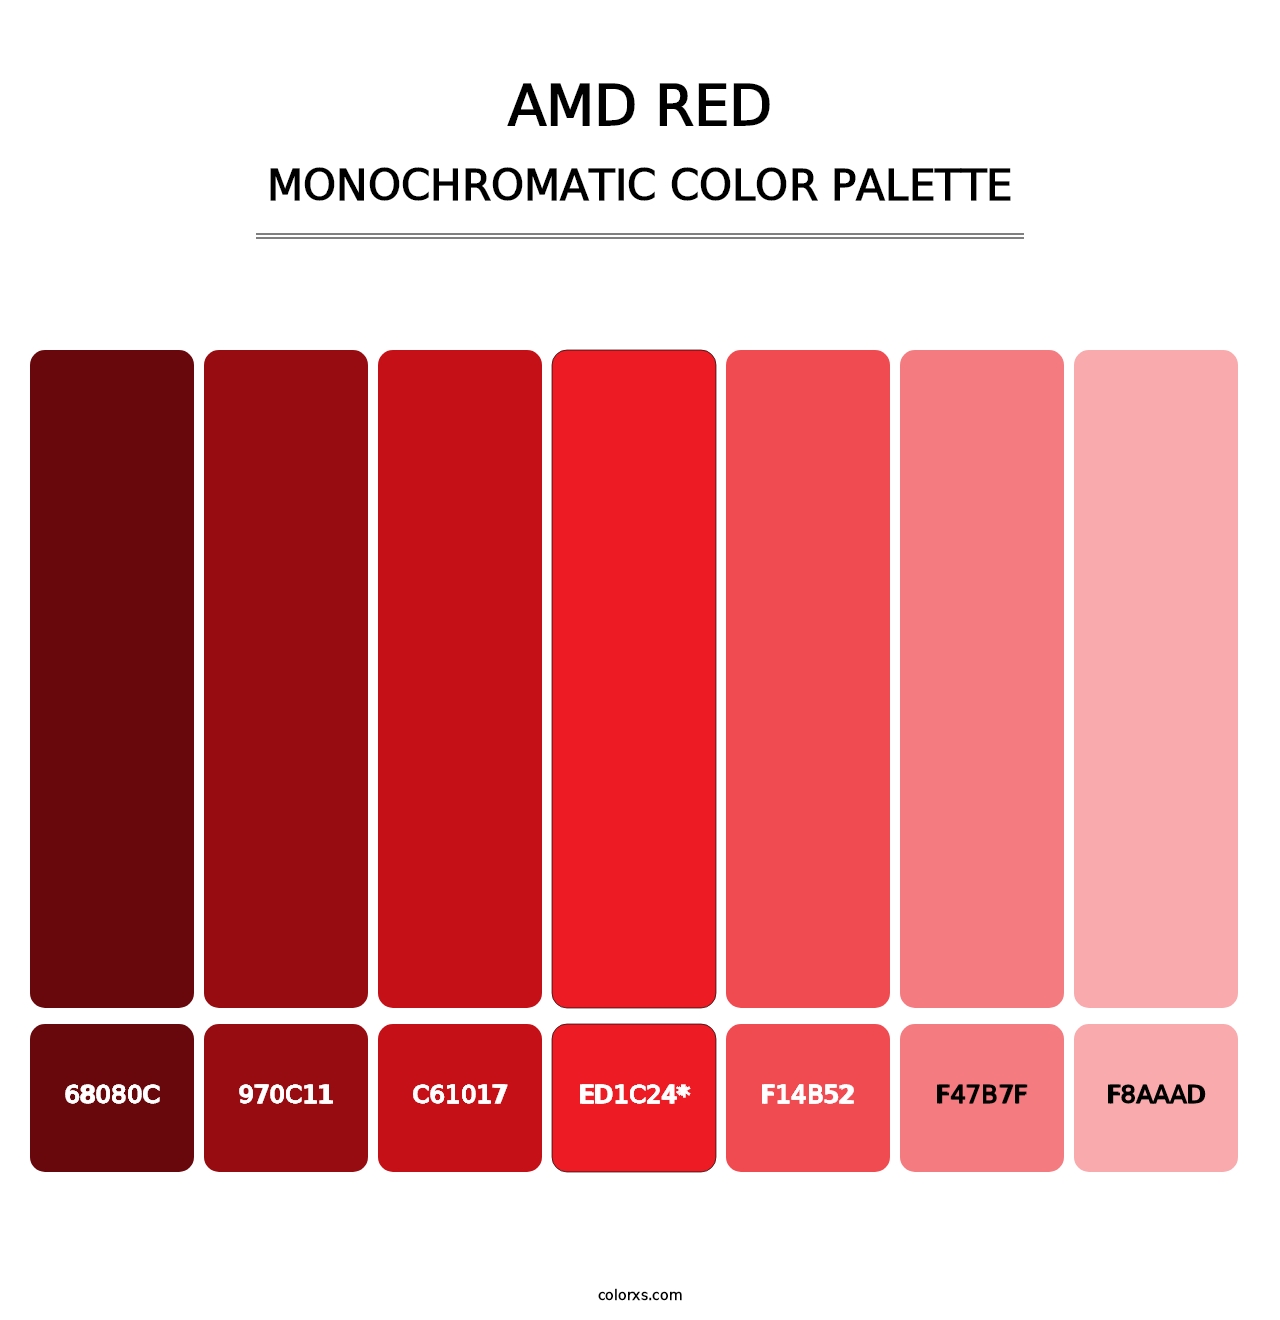 AMD Red - Monochromatic Color Palette